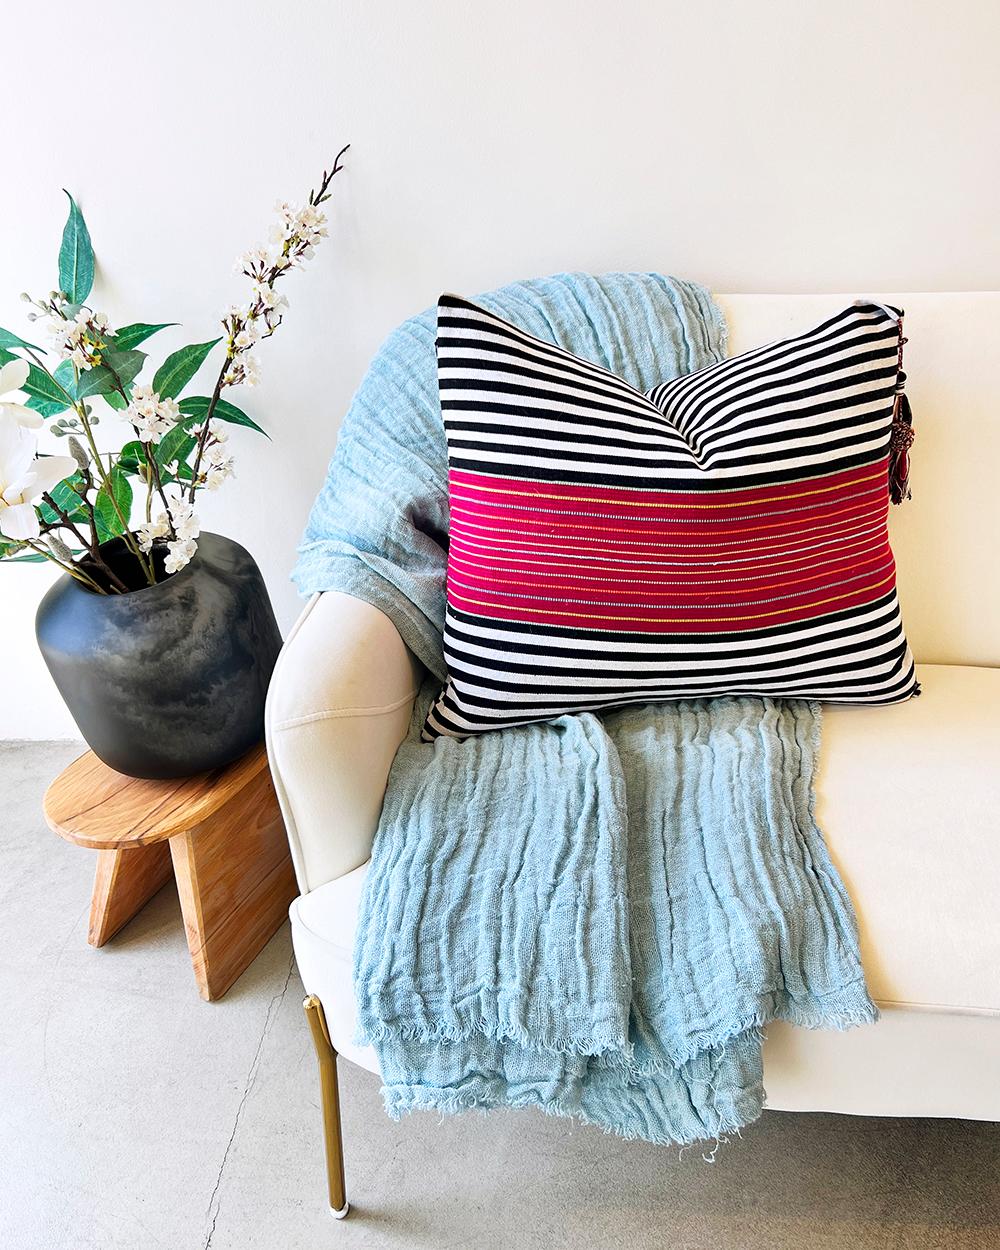 This SanCri Pillow features bold black, white and viva magenta stripes for a distinct Mexican design. Handmade in Latin America, it is the perfect addition to any local home decor or interior design setting. Fair trade certified for social